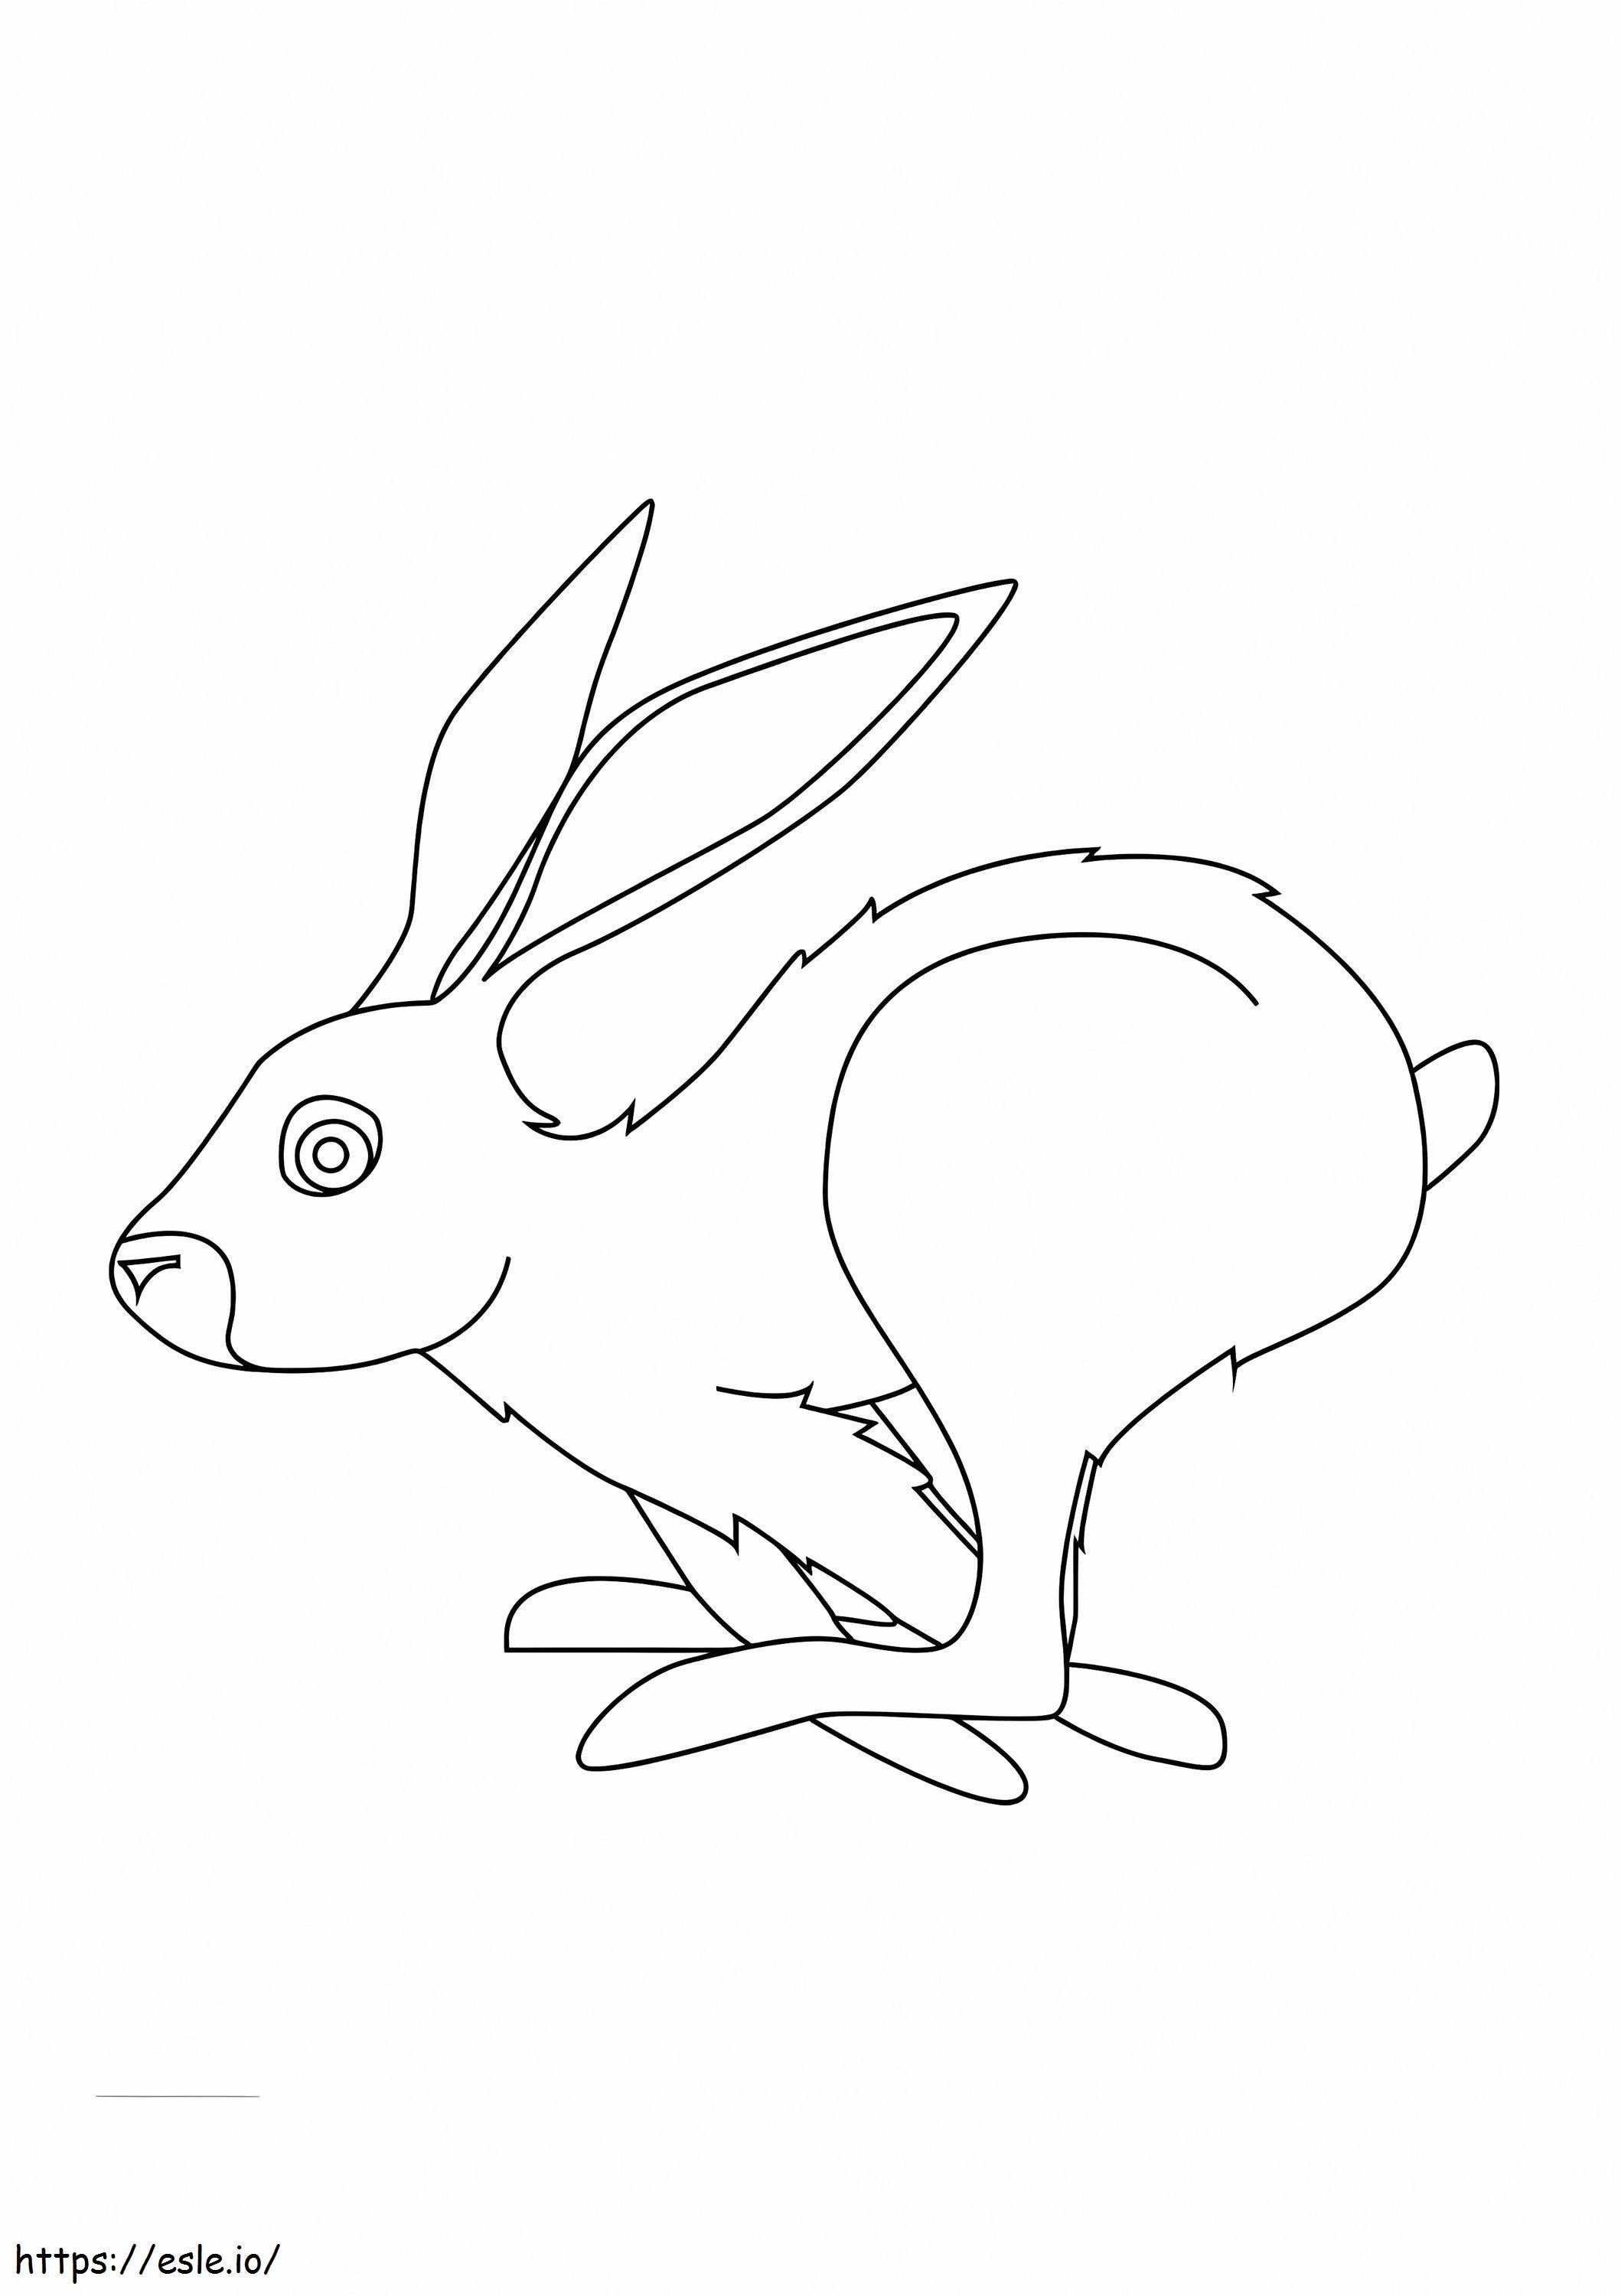 Rabbit Running coloring page